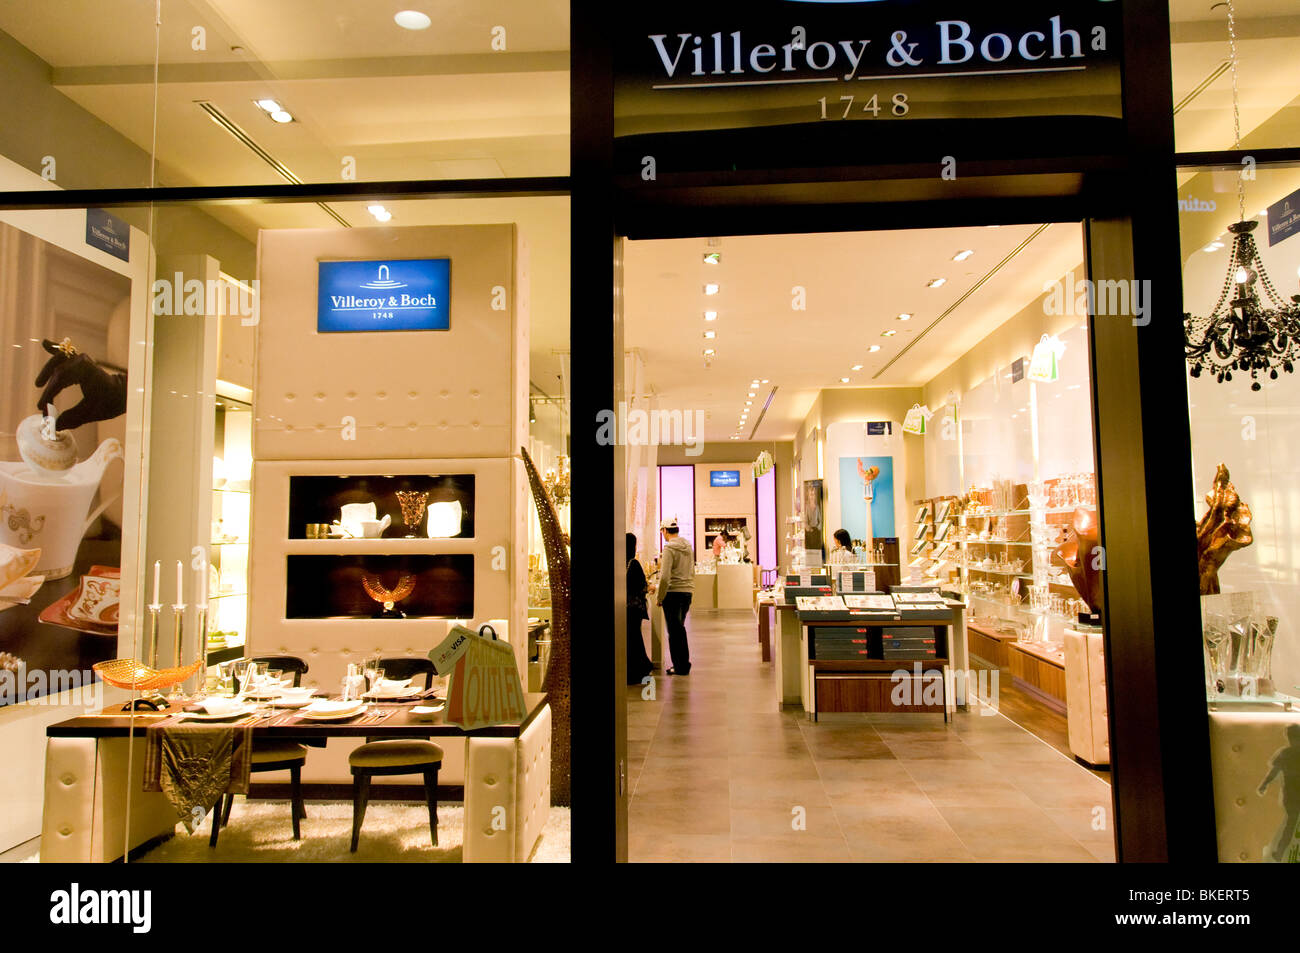 Villeroy and Boch Stock Photo